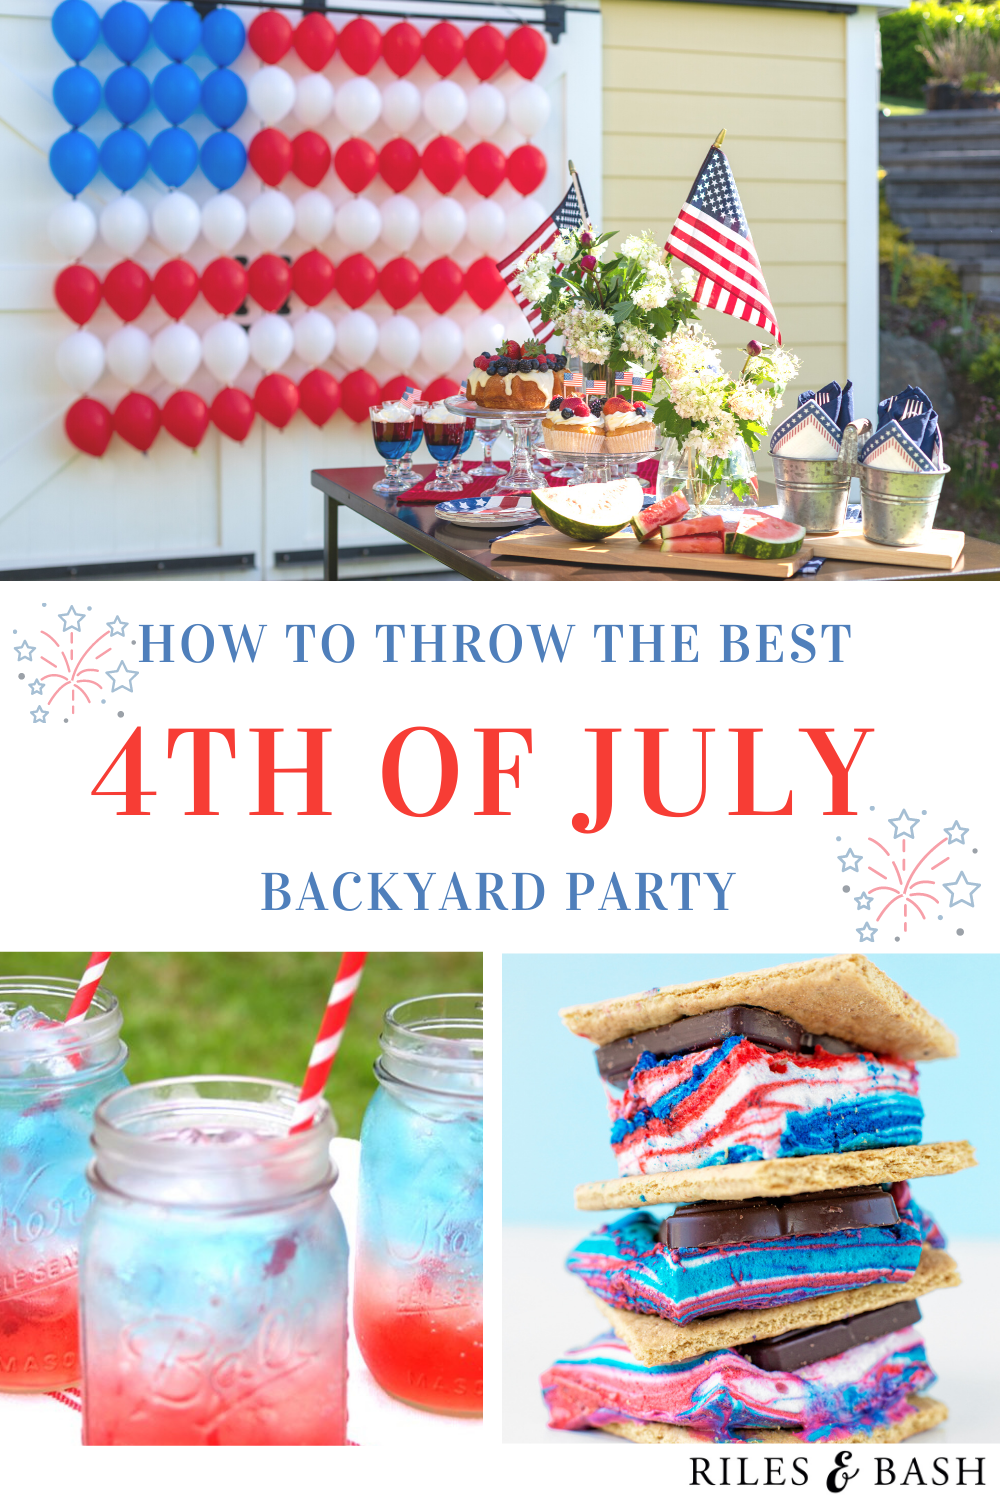 Riles & Bash_How to Throw the Best 4th of July Backyard Party